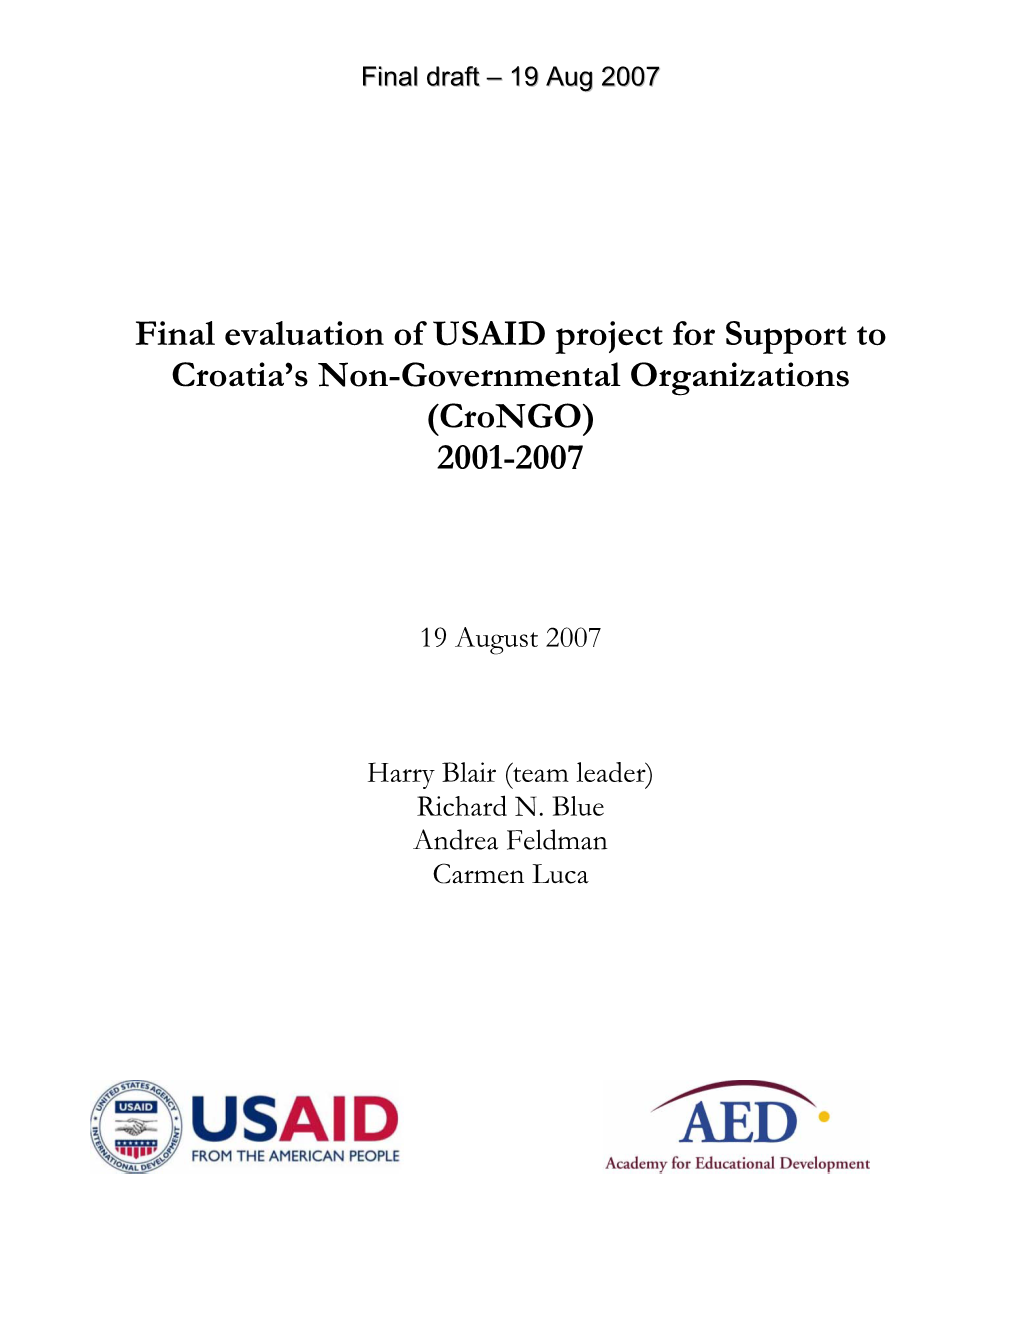 Final Evaluation of USAID Project for Support to Croatia’S Non-Governmental Organizations (Crongo) 2001-2007